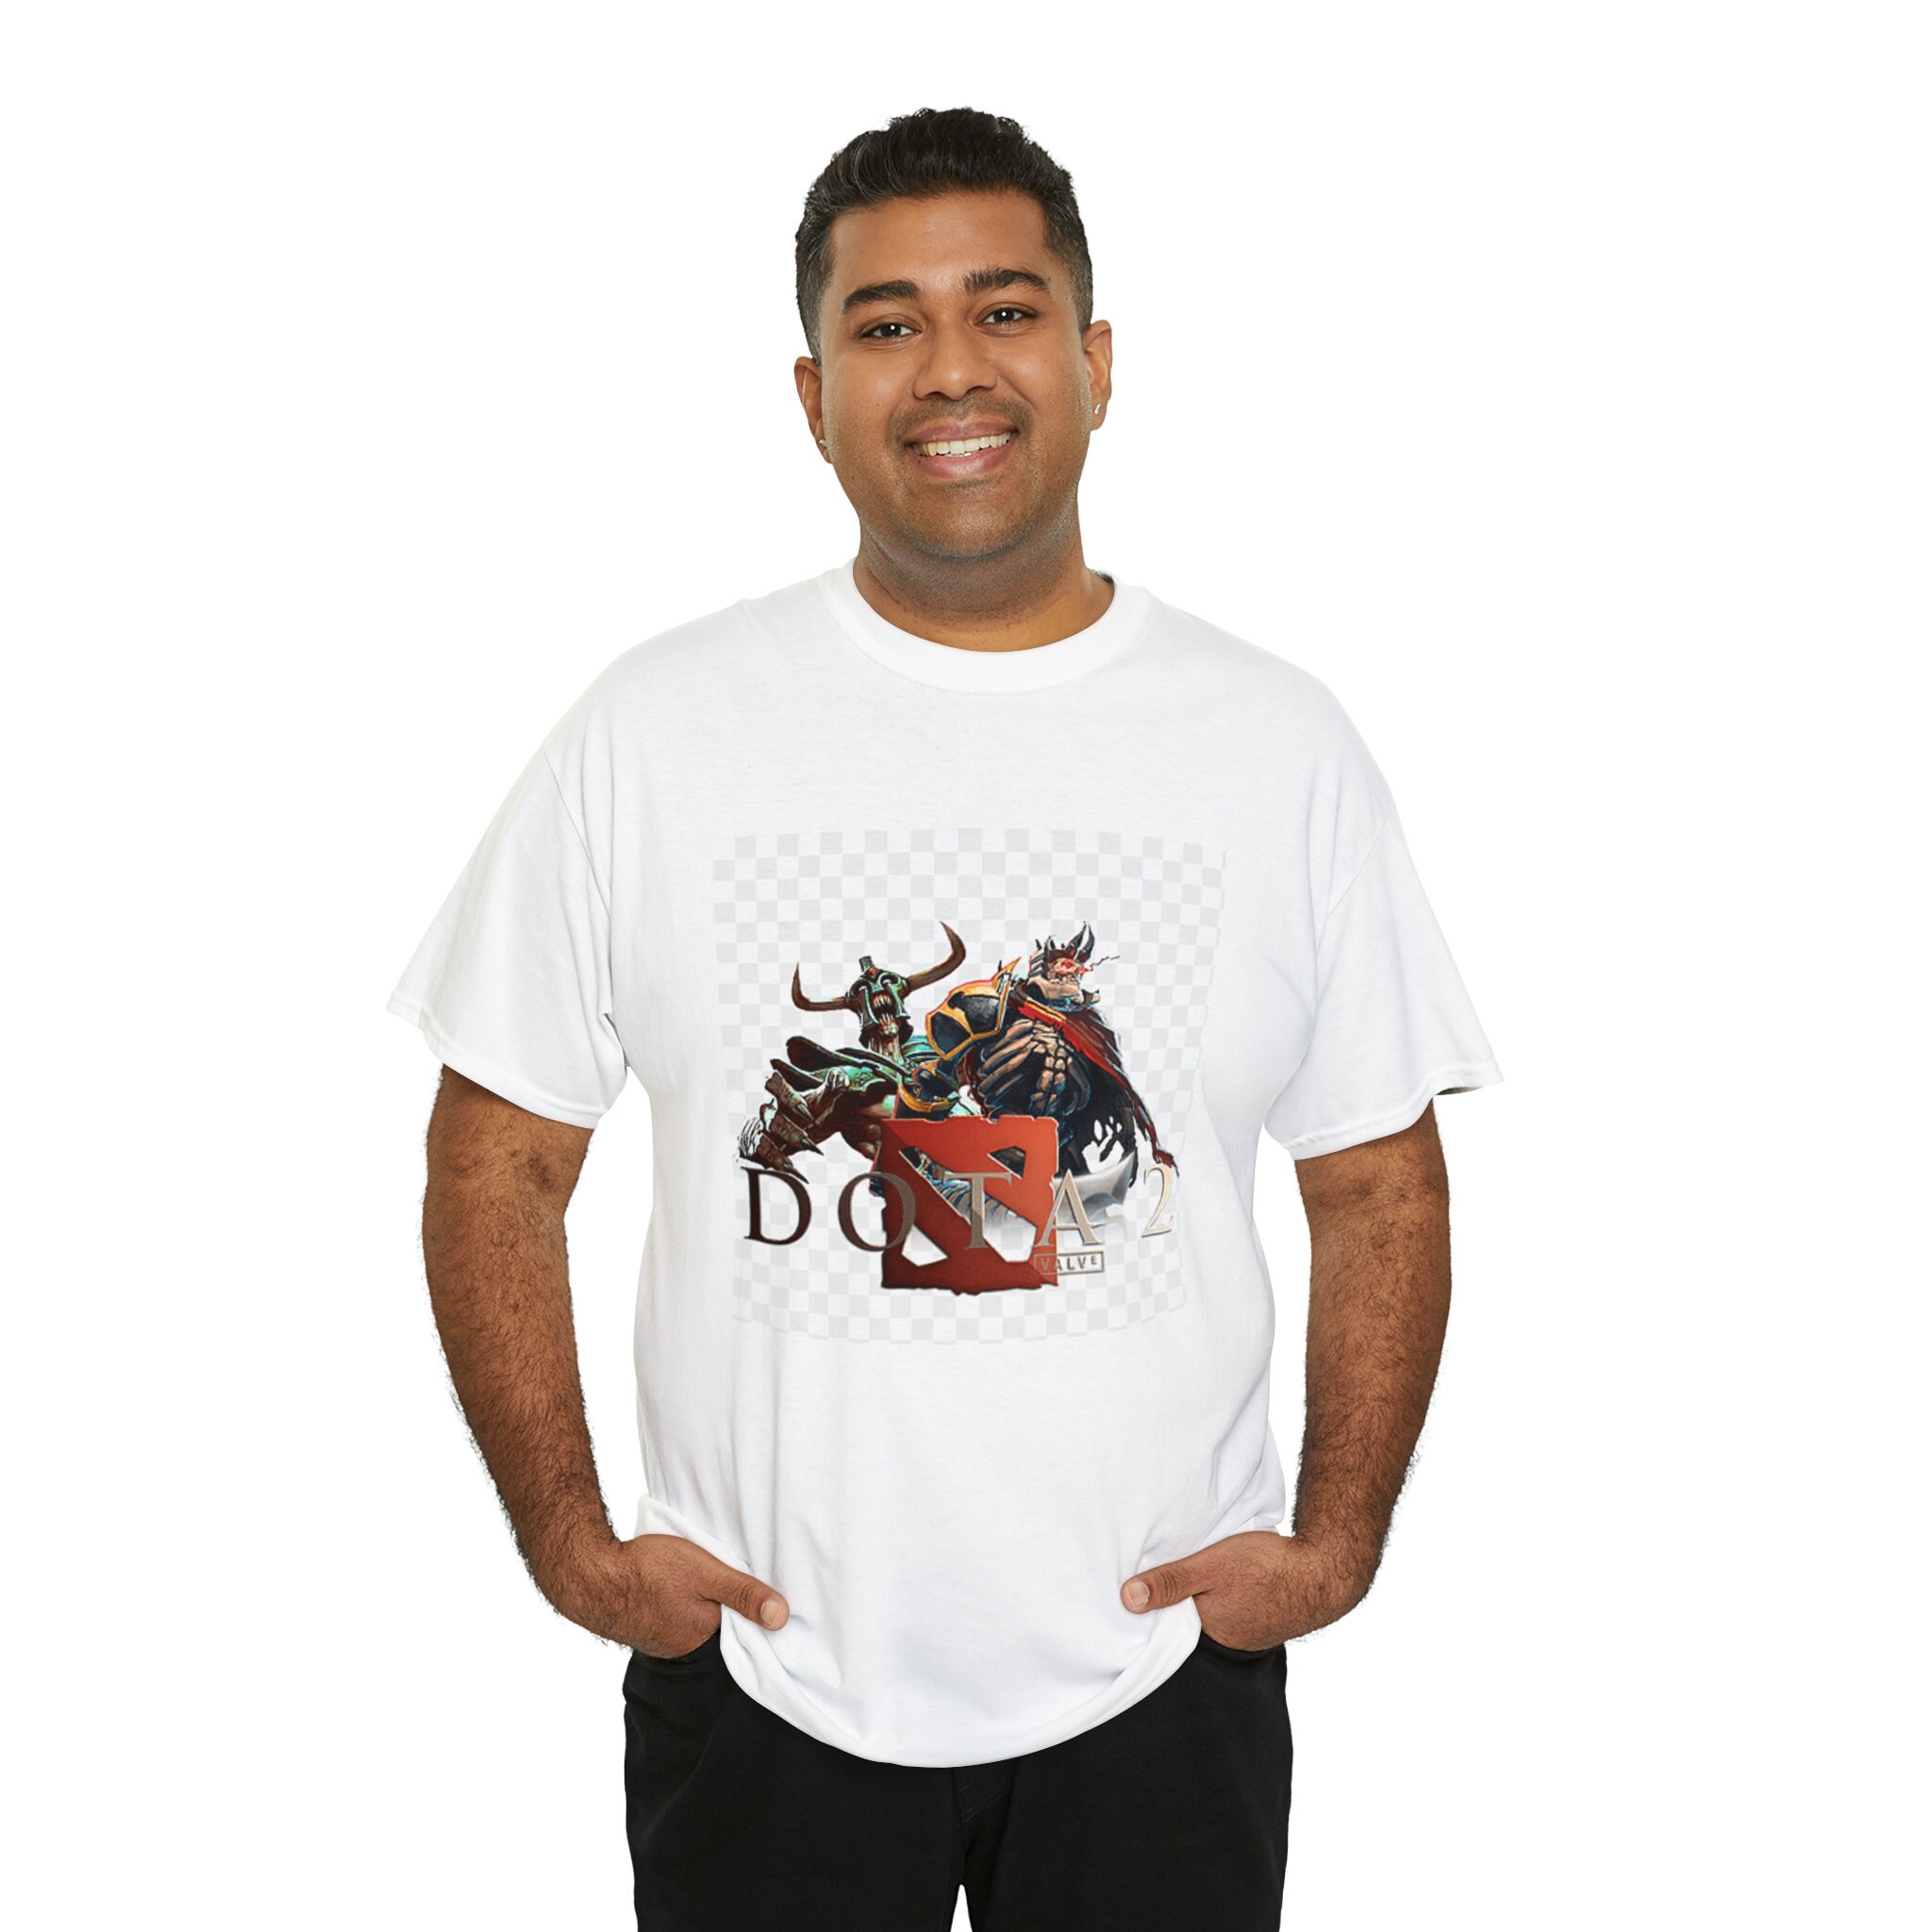 good game well played dota 2 league of legends moba gamers tshirt